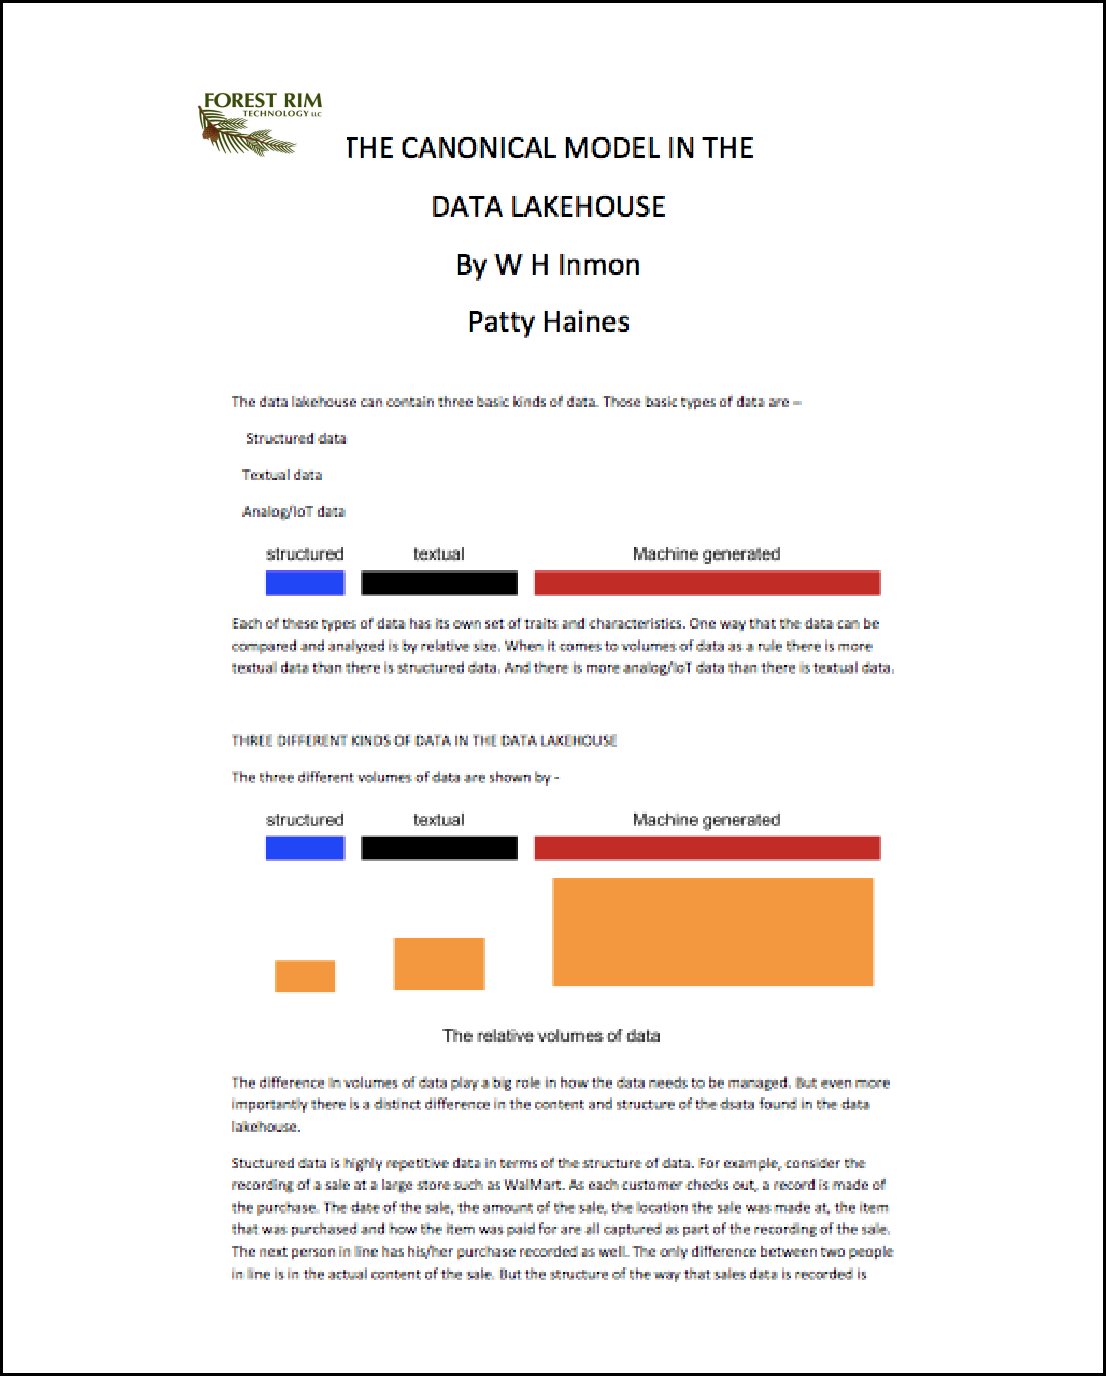 THE CANONICAL MODEL IN THE DATA LAKEHOUSE